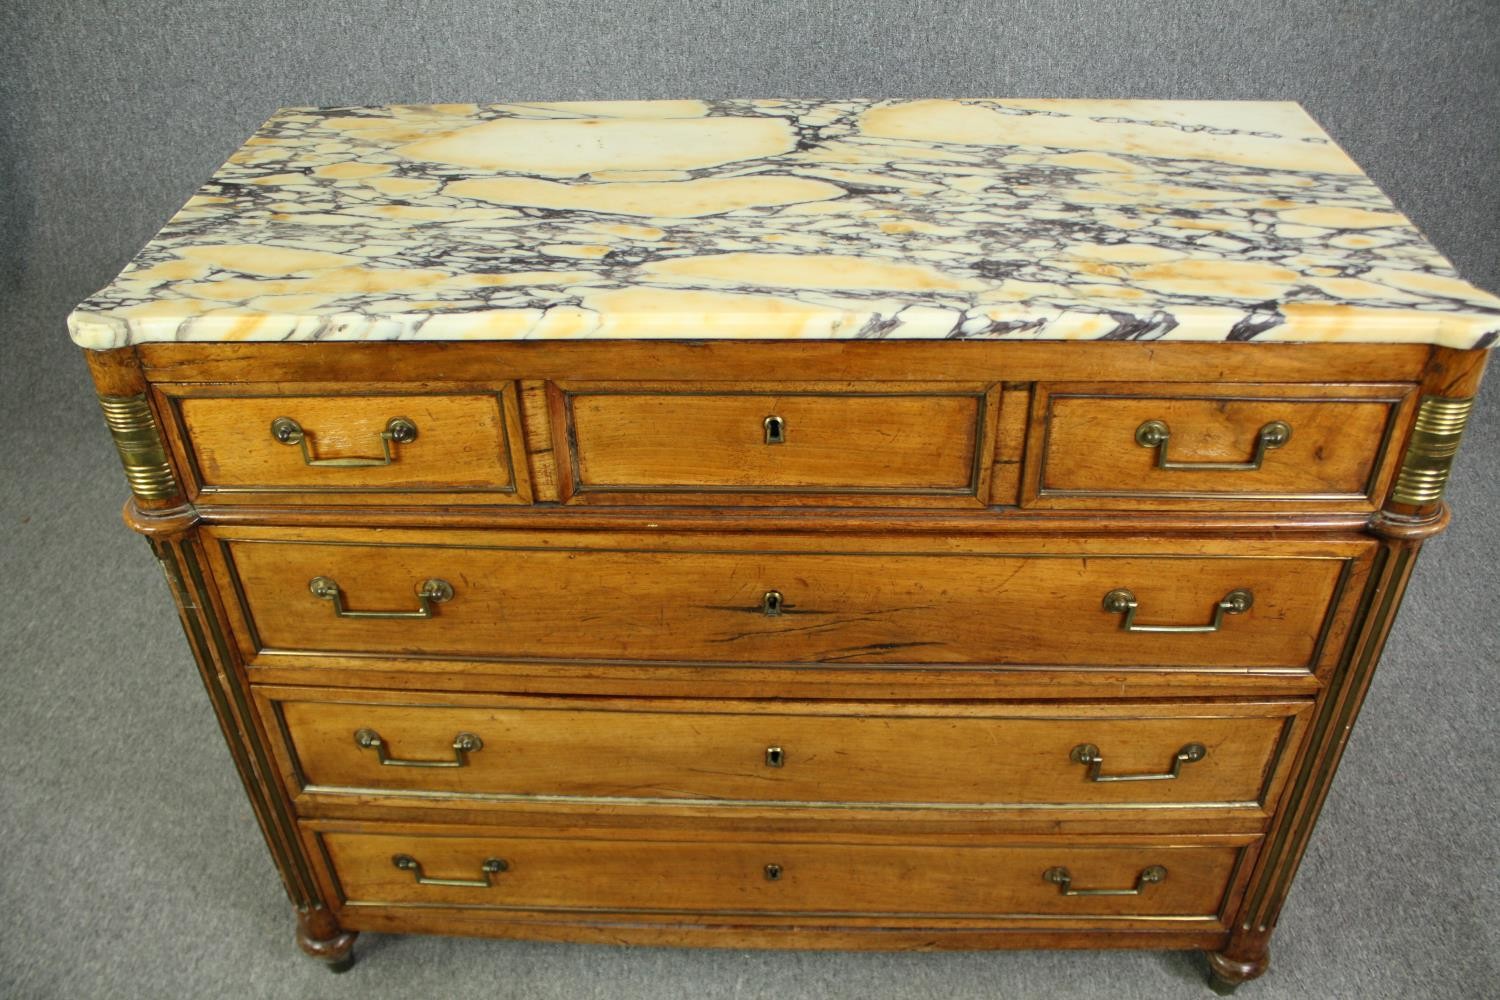 A French Directoire walnut commode, with a breccia marble top, 19th century. H.98 W.126 D.57cm. - Image 5 of 11